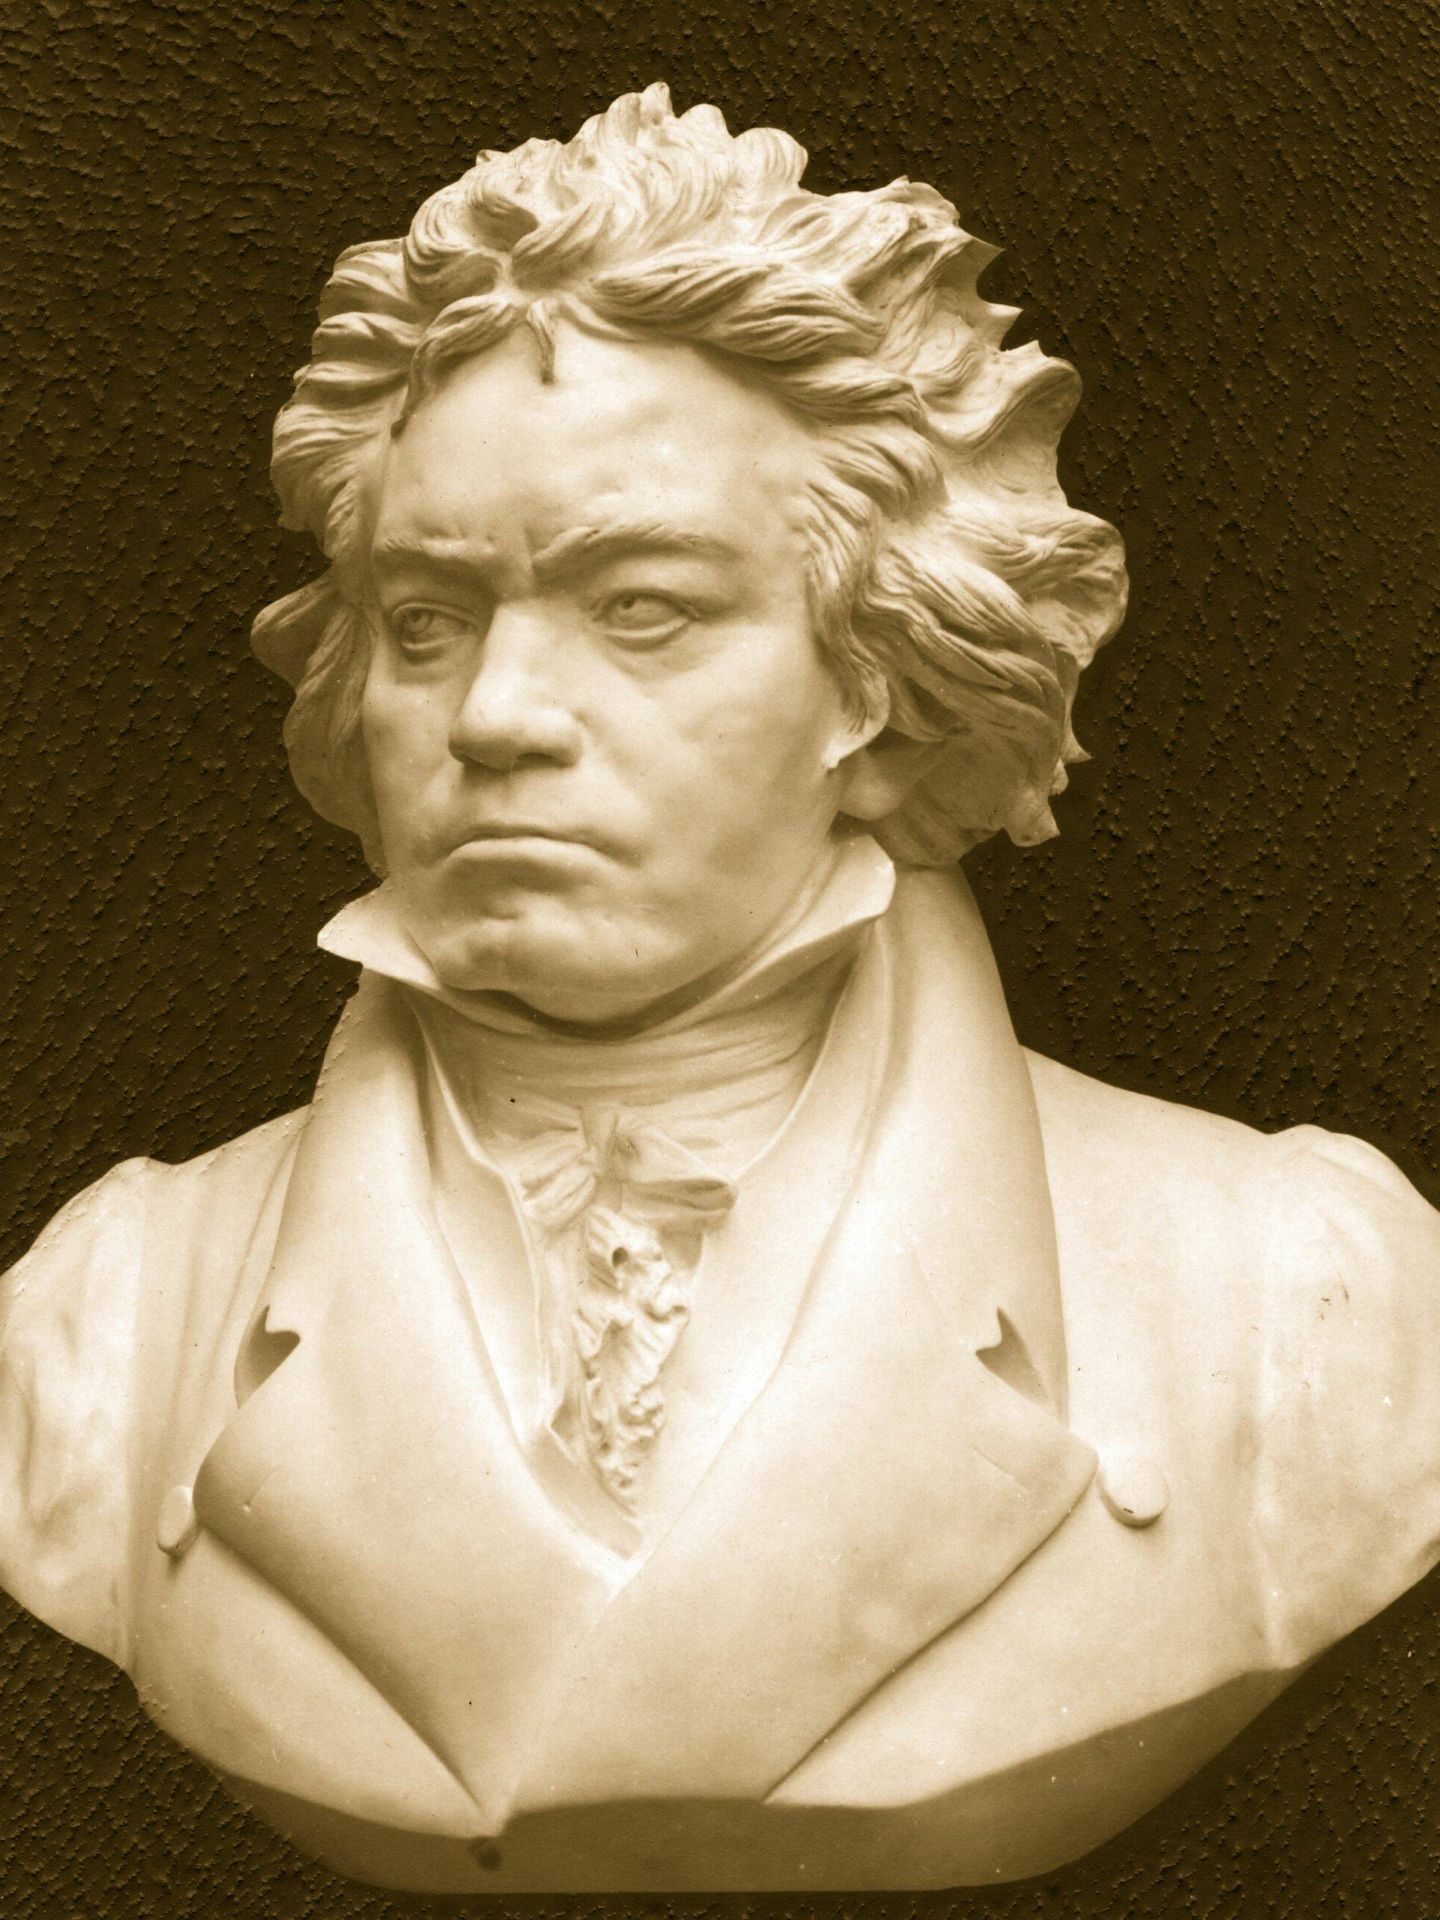 Busto de Beethoven. (Getty Images)